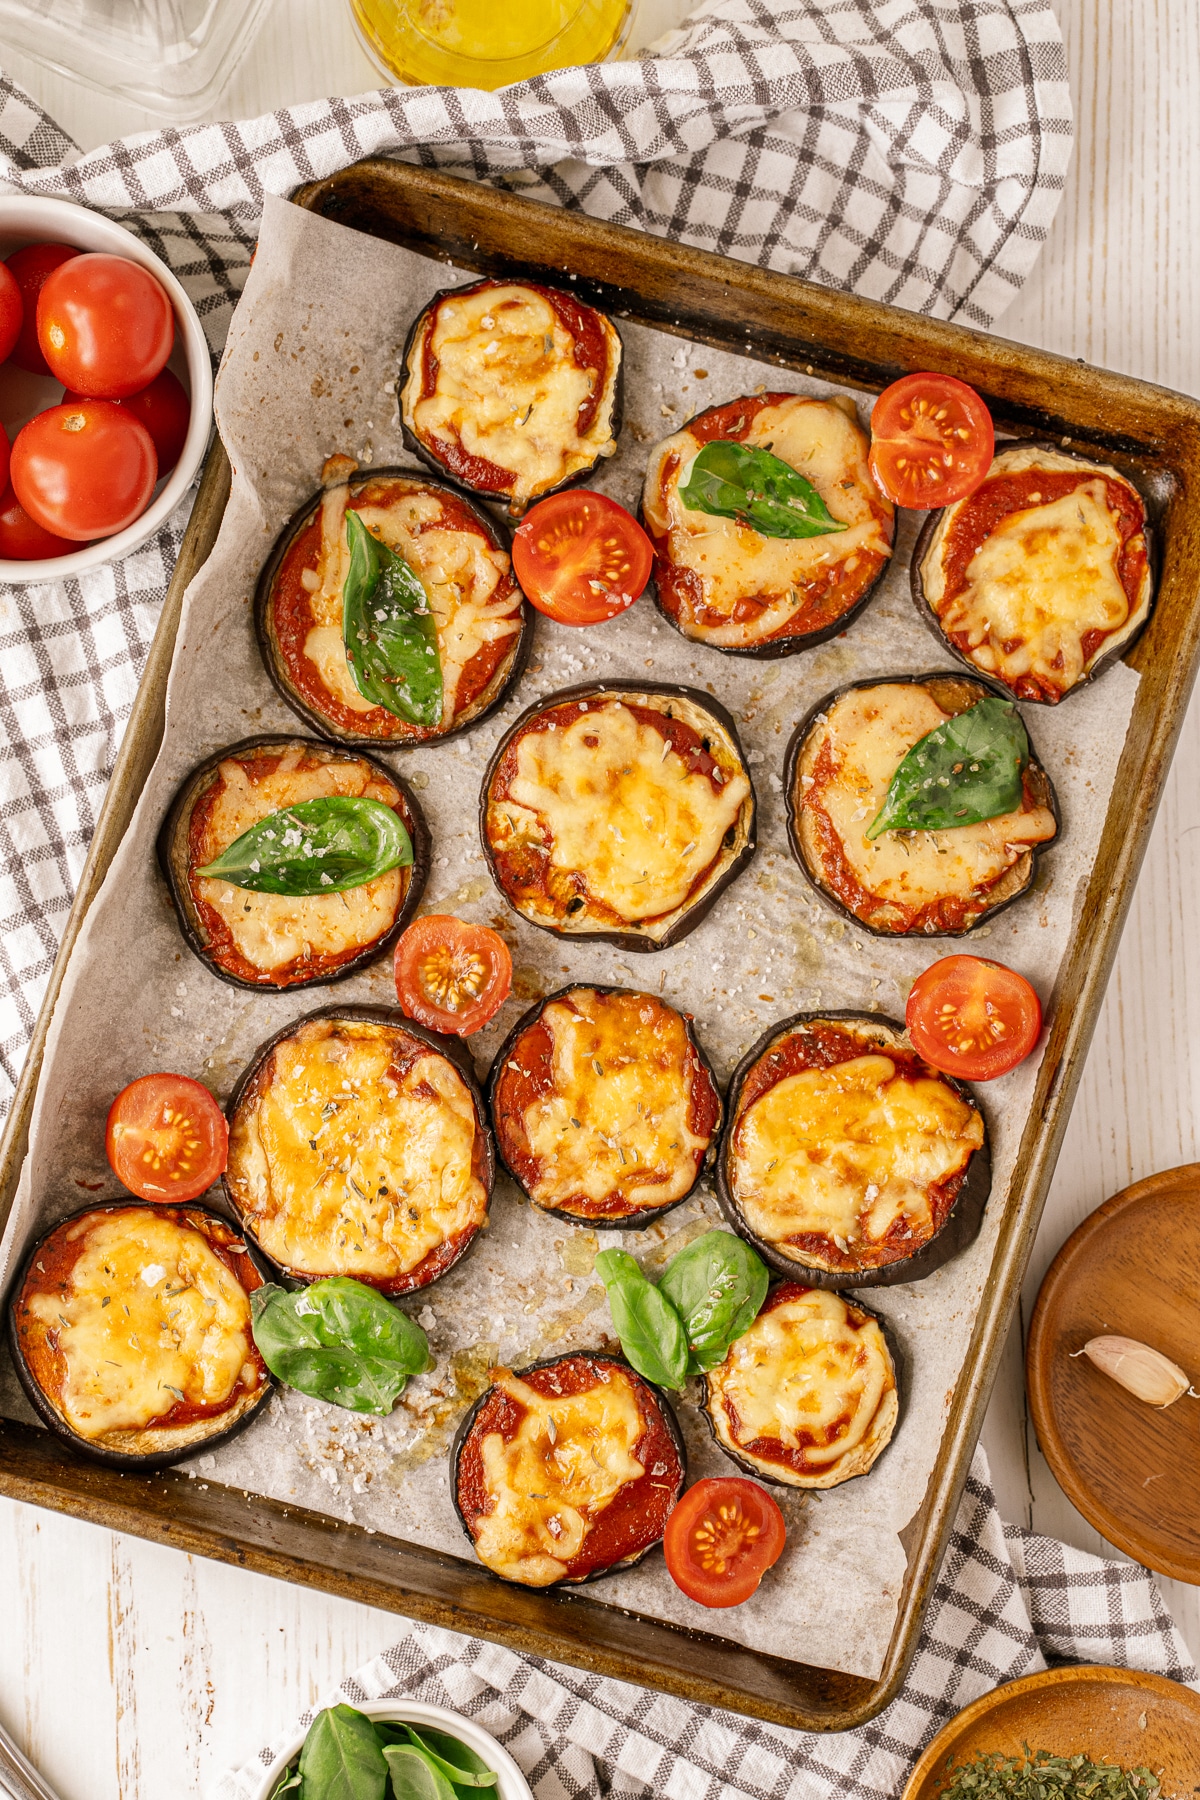 Overhead picture of eggplant parmesan on a baking sheet lined with parchment paper and a small white bowl of tomatoes in upper left corner on a checkered towel.